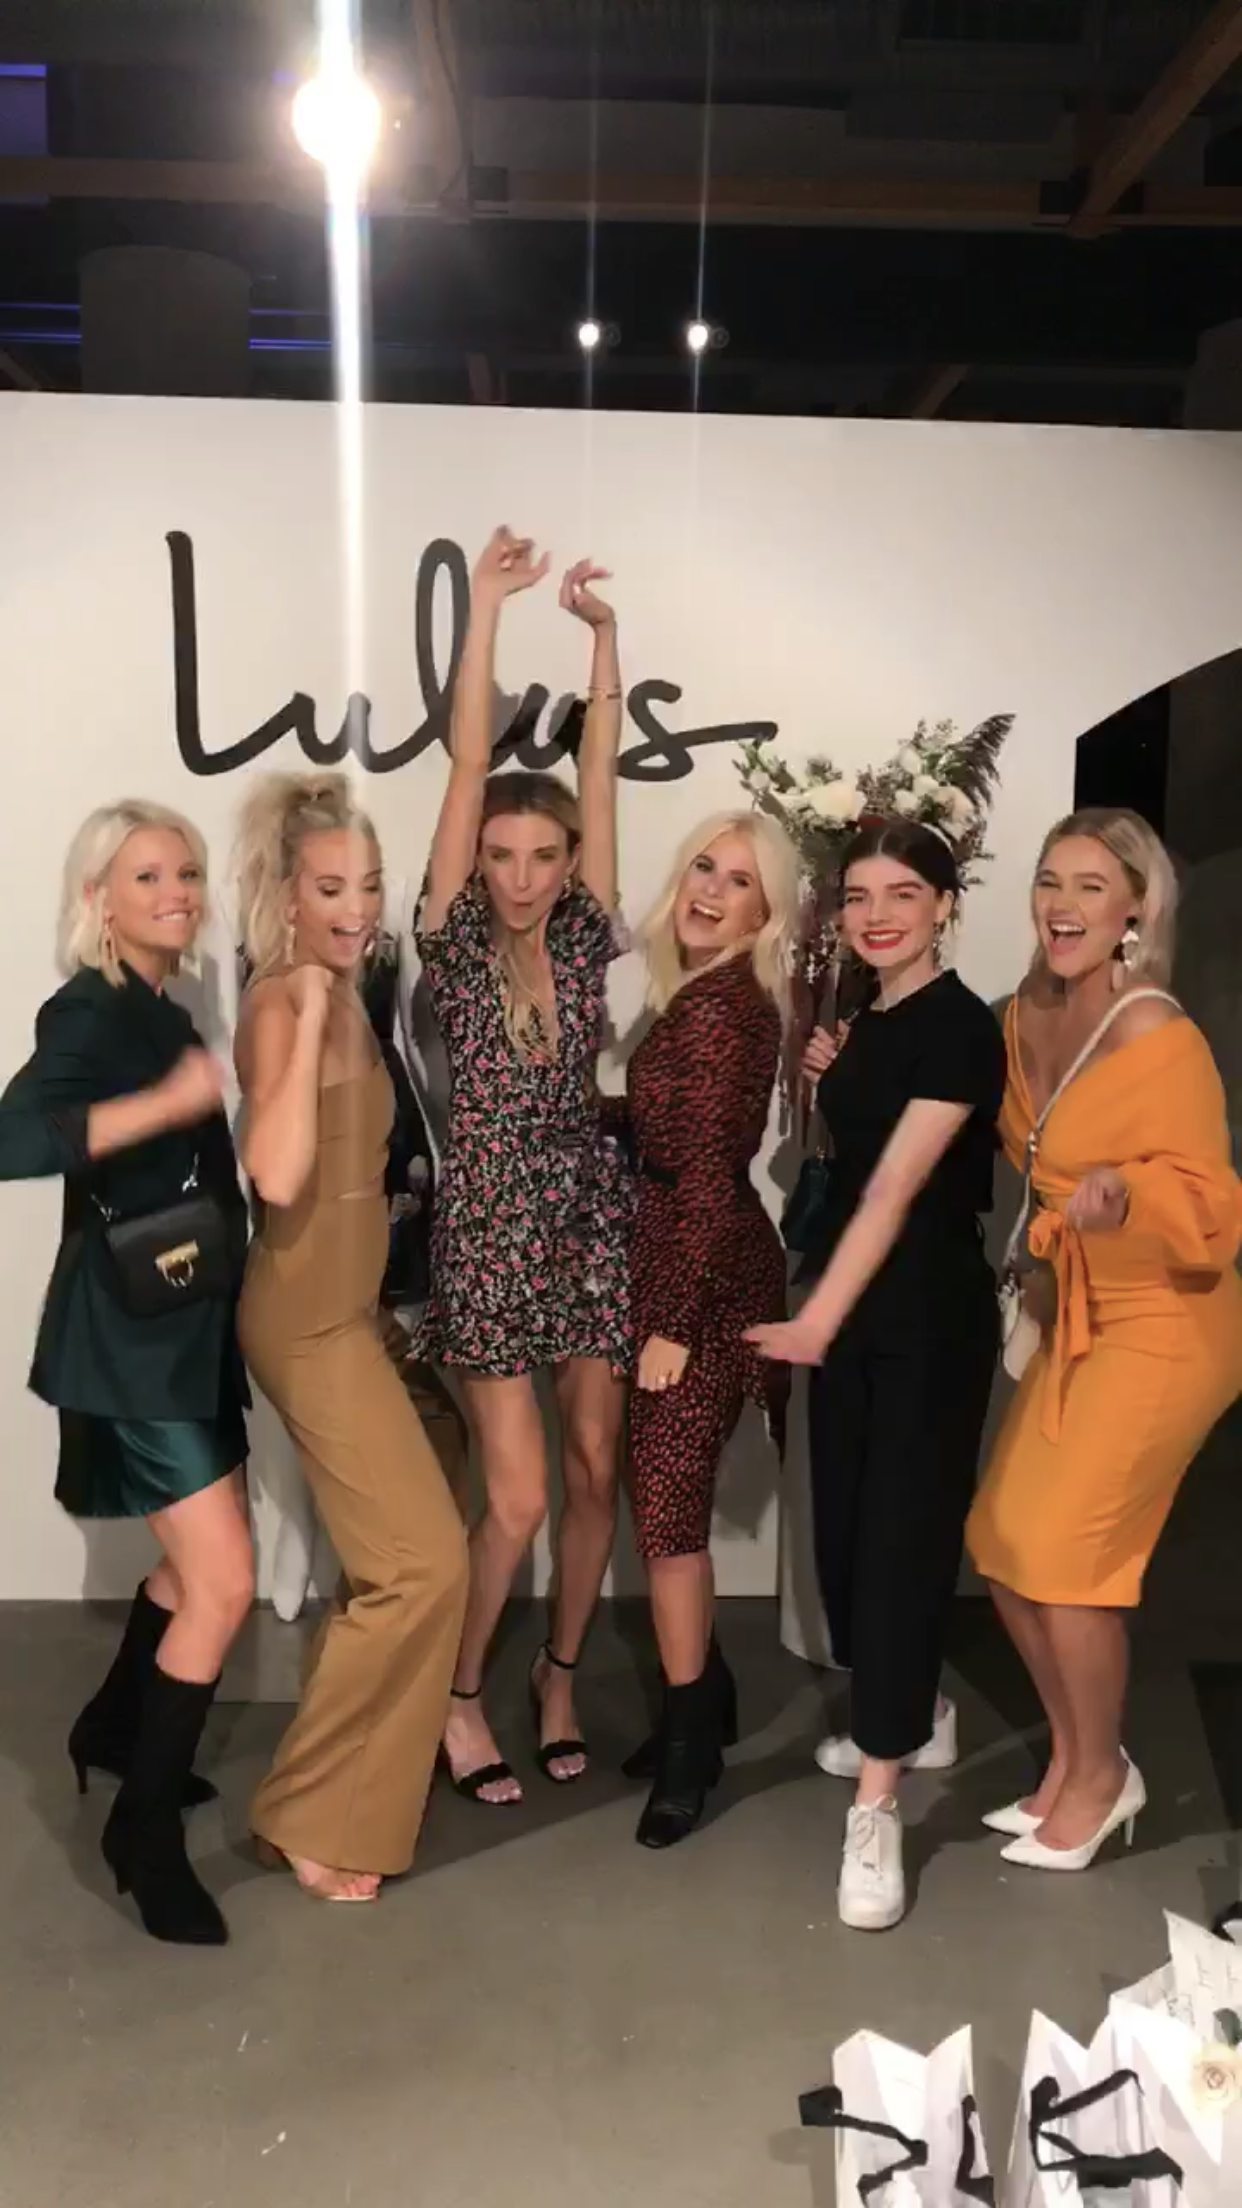 Bre Sheppard - My First NYFW - Lulus Party Dance.PNG